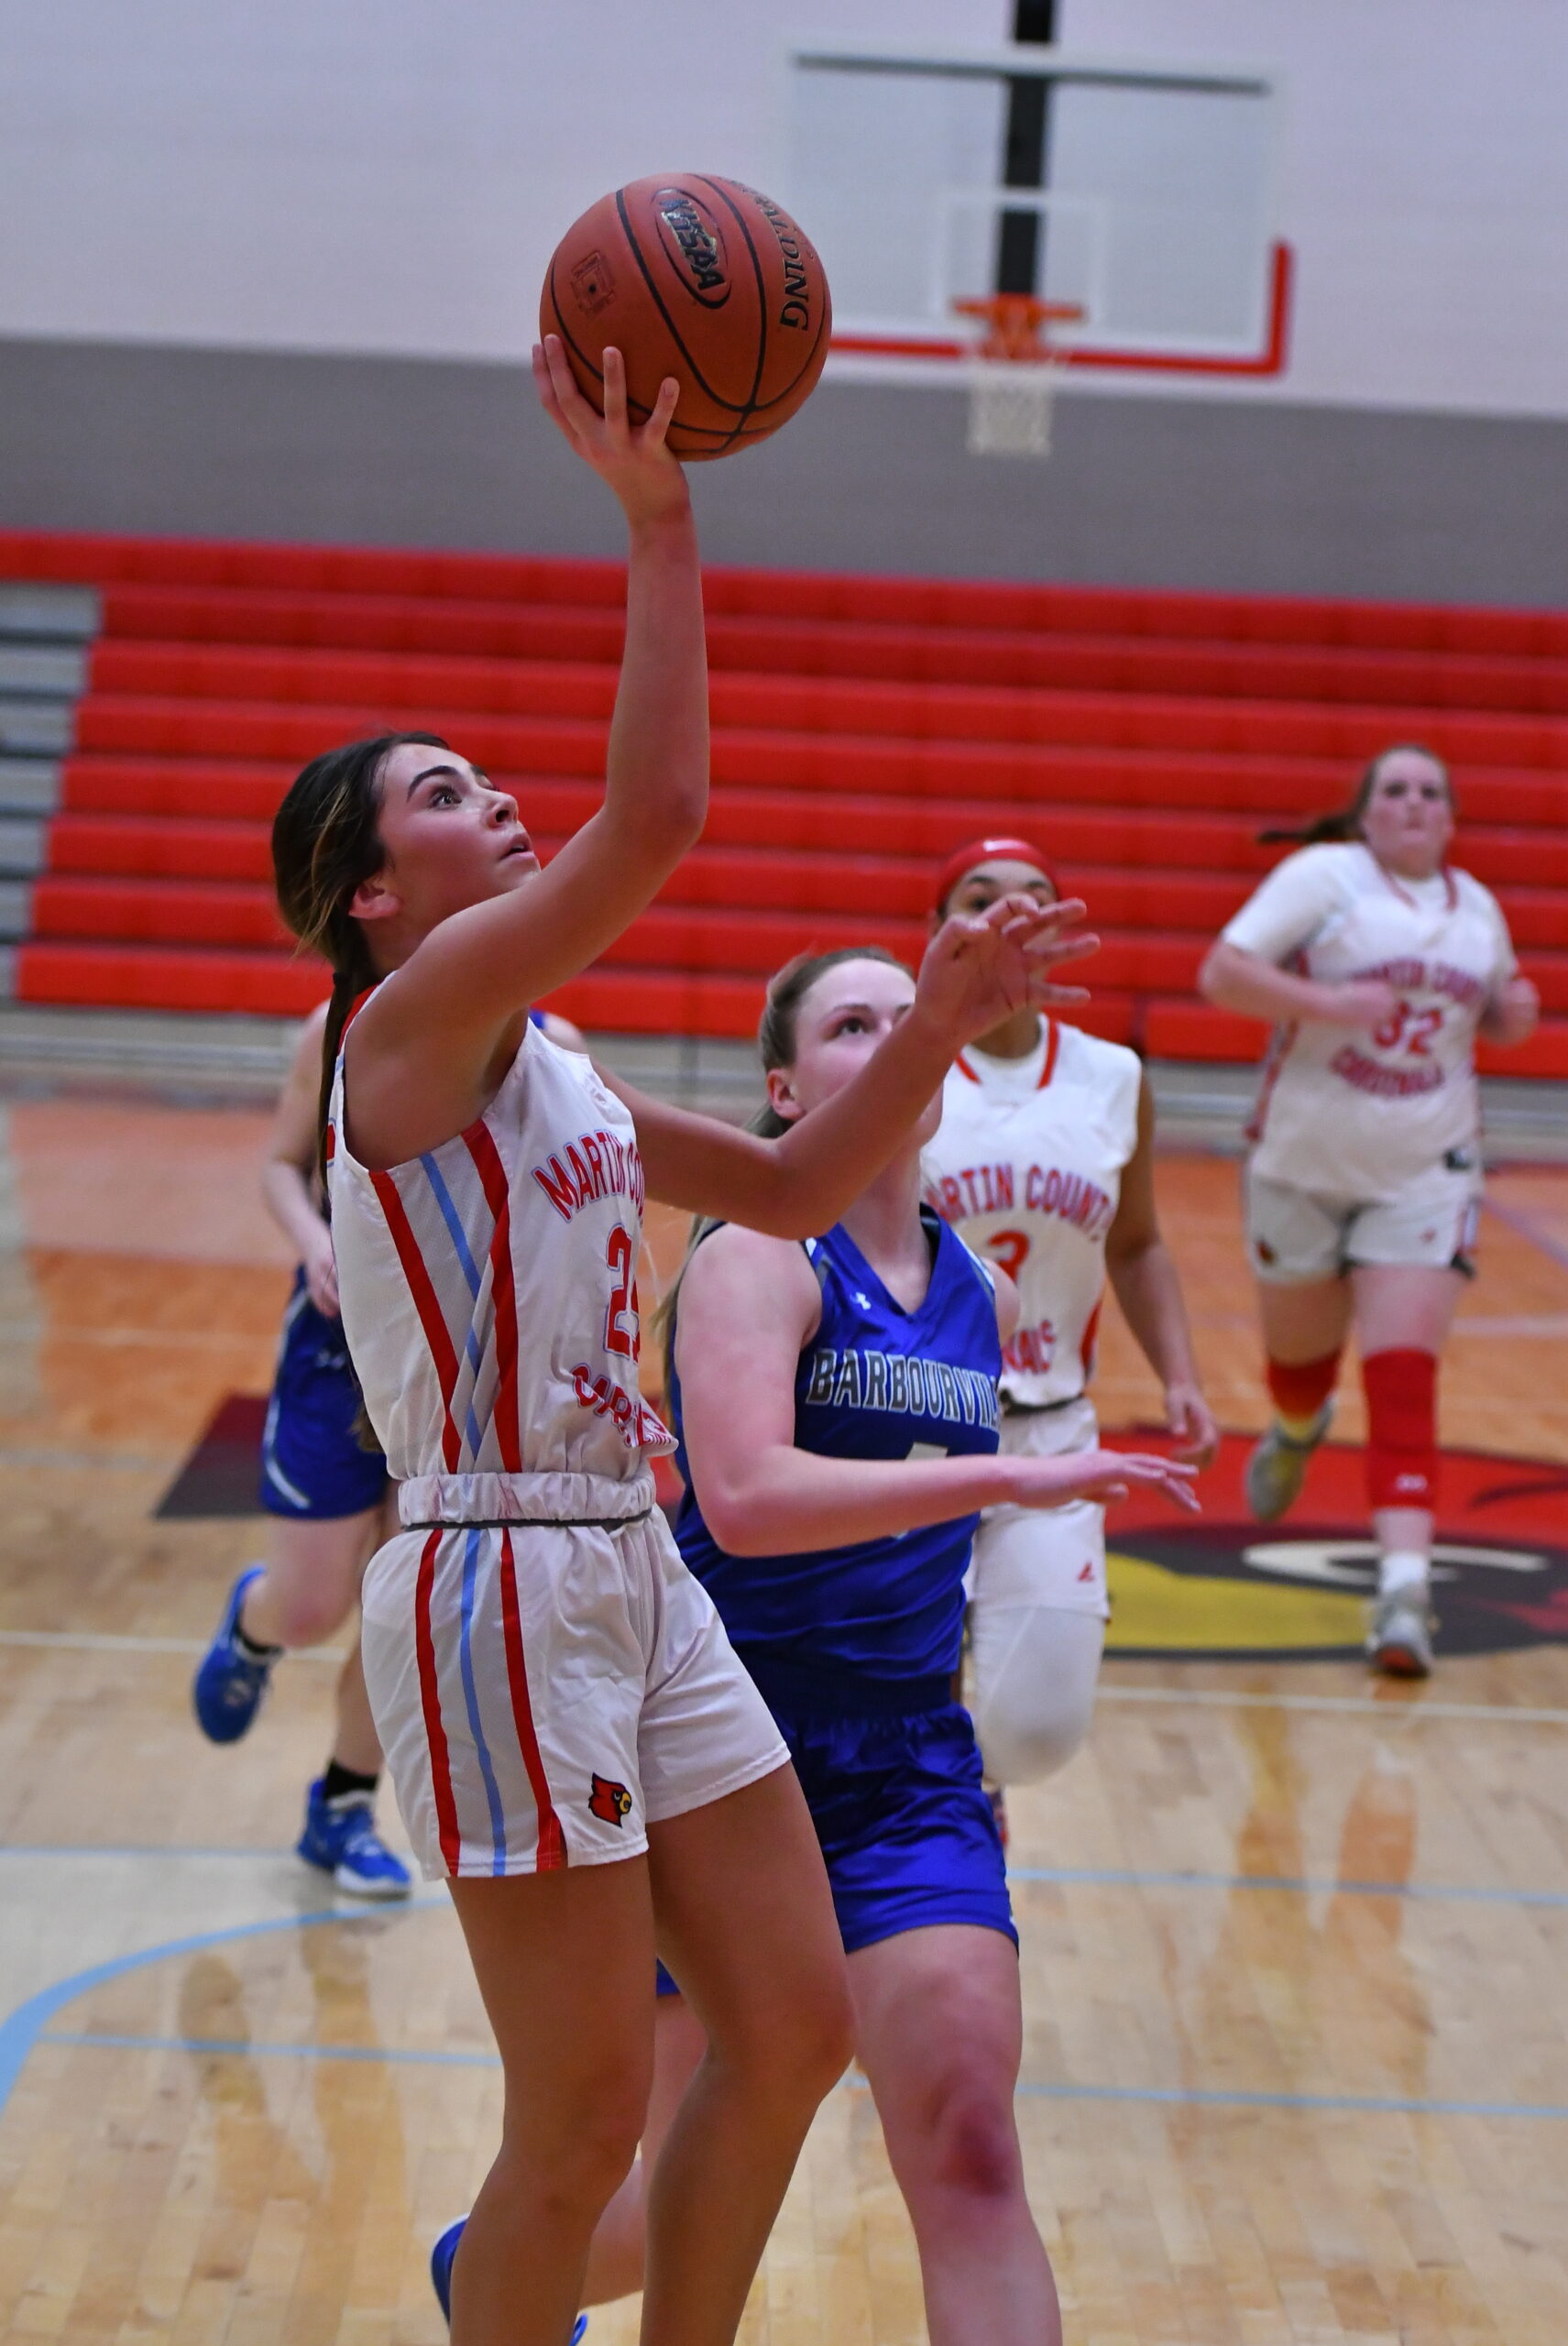 Martin County Lady Cards clip Eagles, crush Barbourville